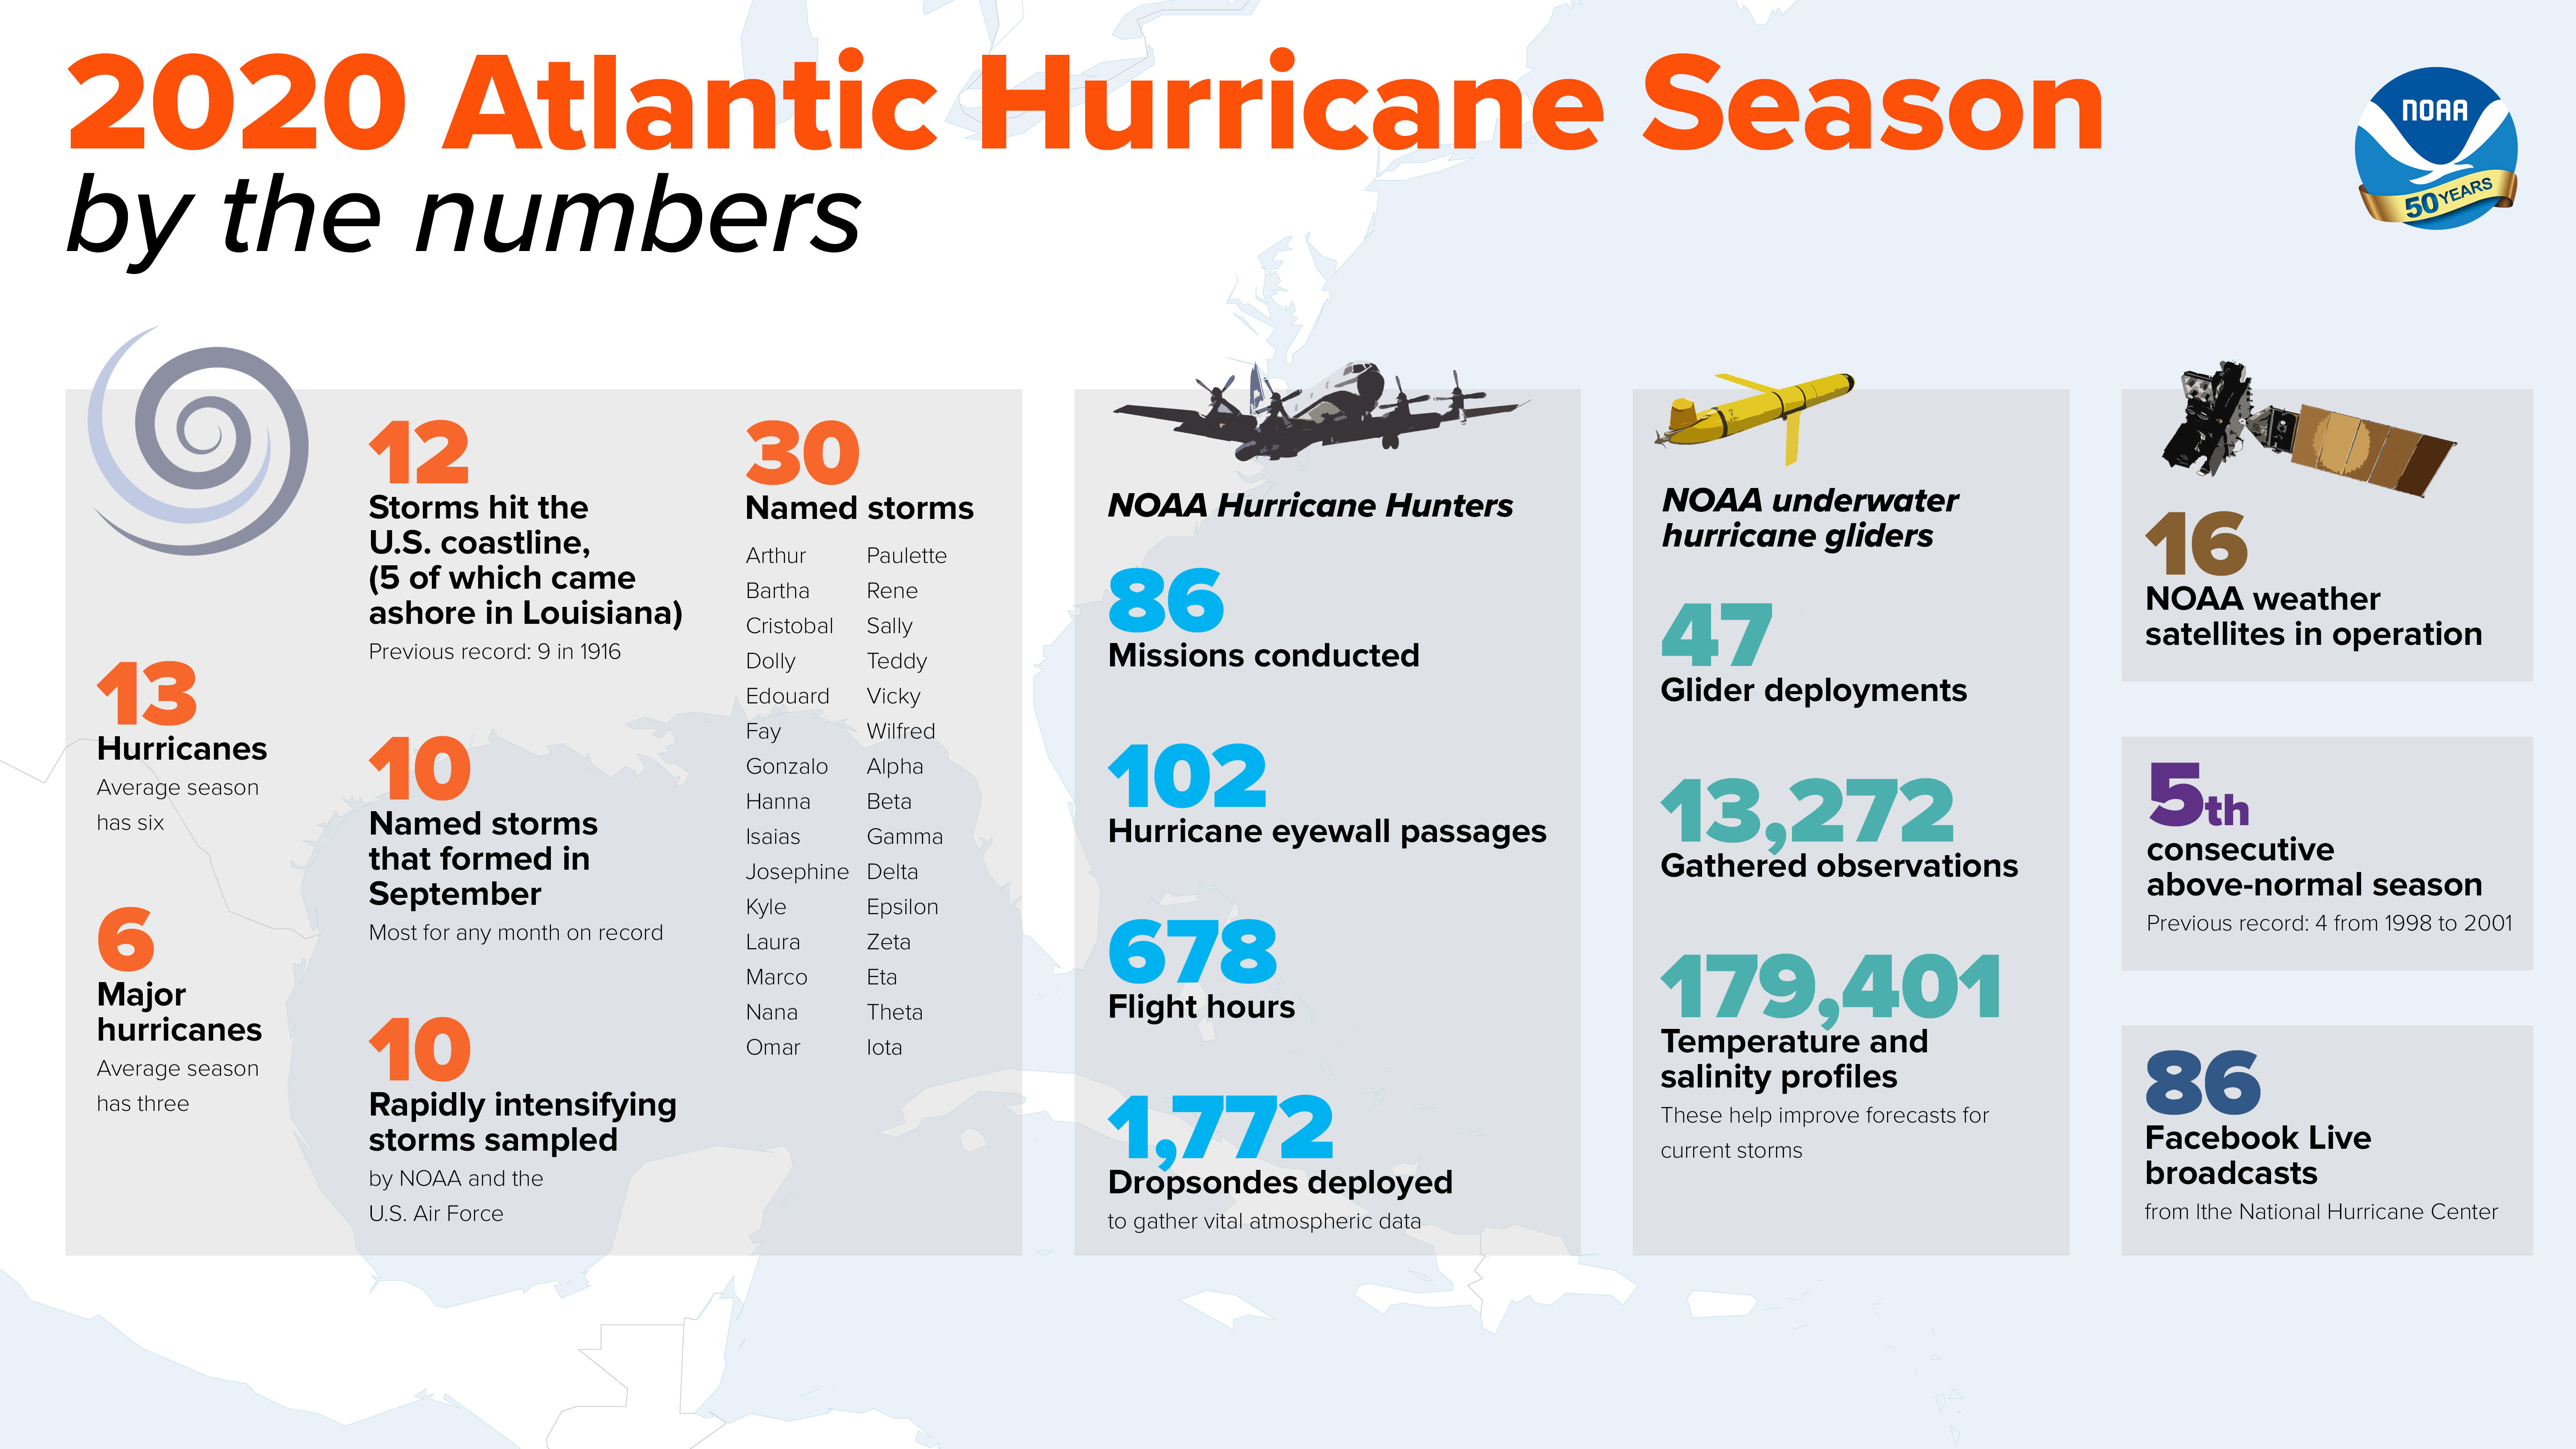 This infographic highlights key facts and statistics from the 2020 Atlantic Hurricane Season (at the time of publishing on November 24). The Atlantic hurricane season officially ends November 30, but storm activity in the tropics can sometimes continue beyond that date.